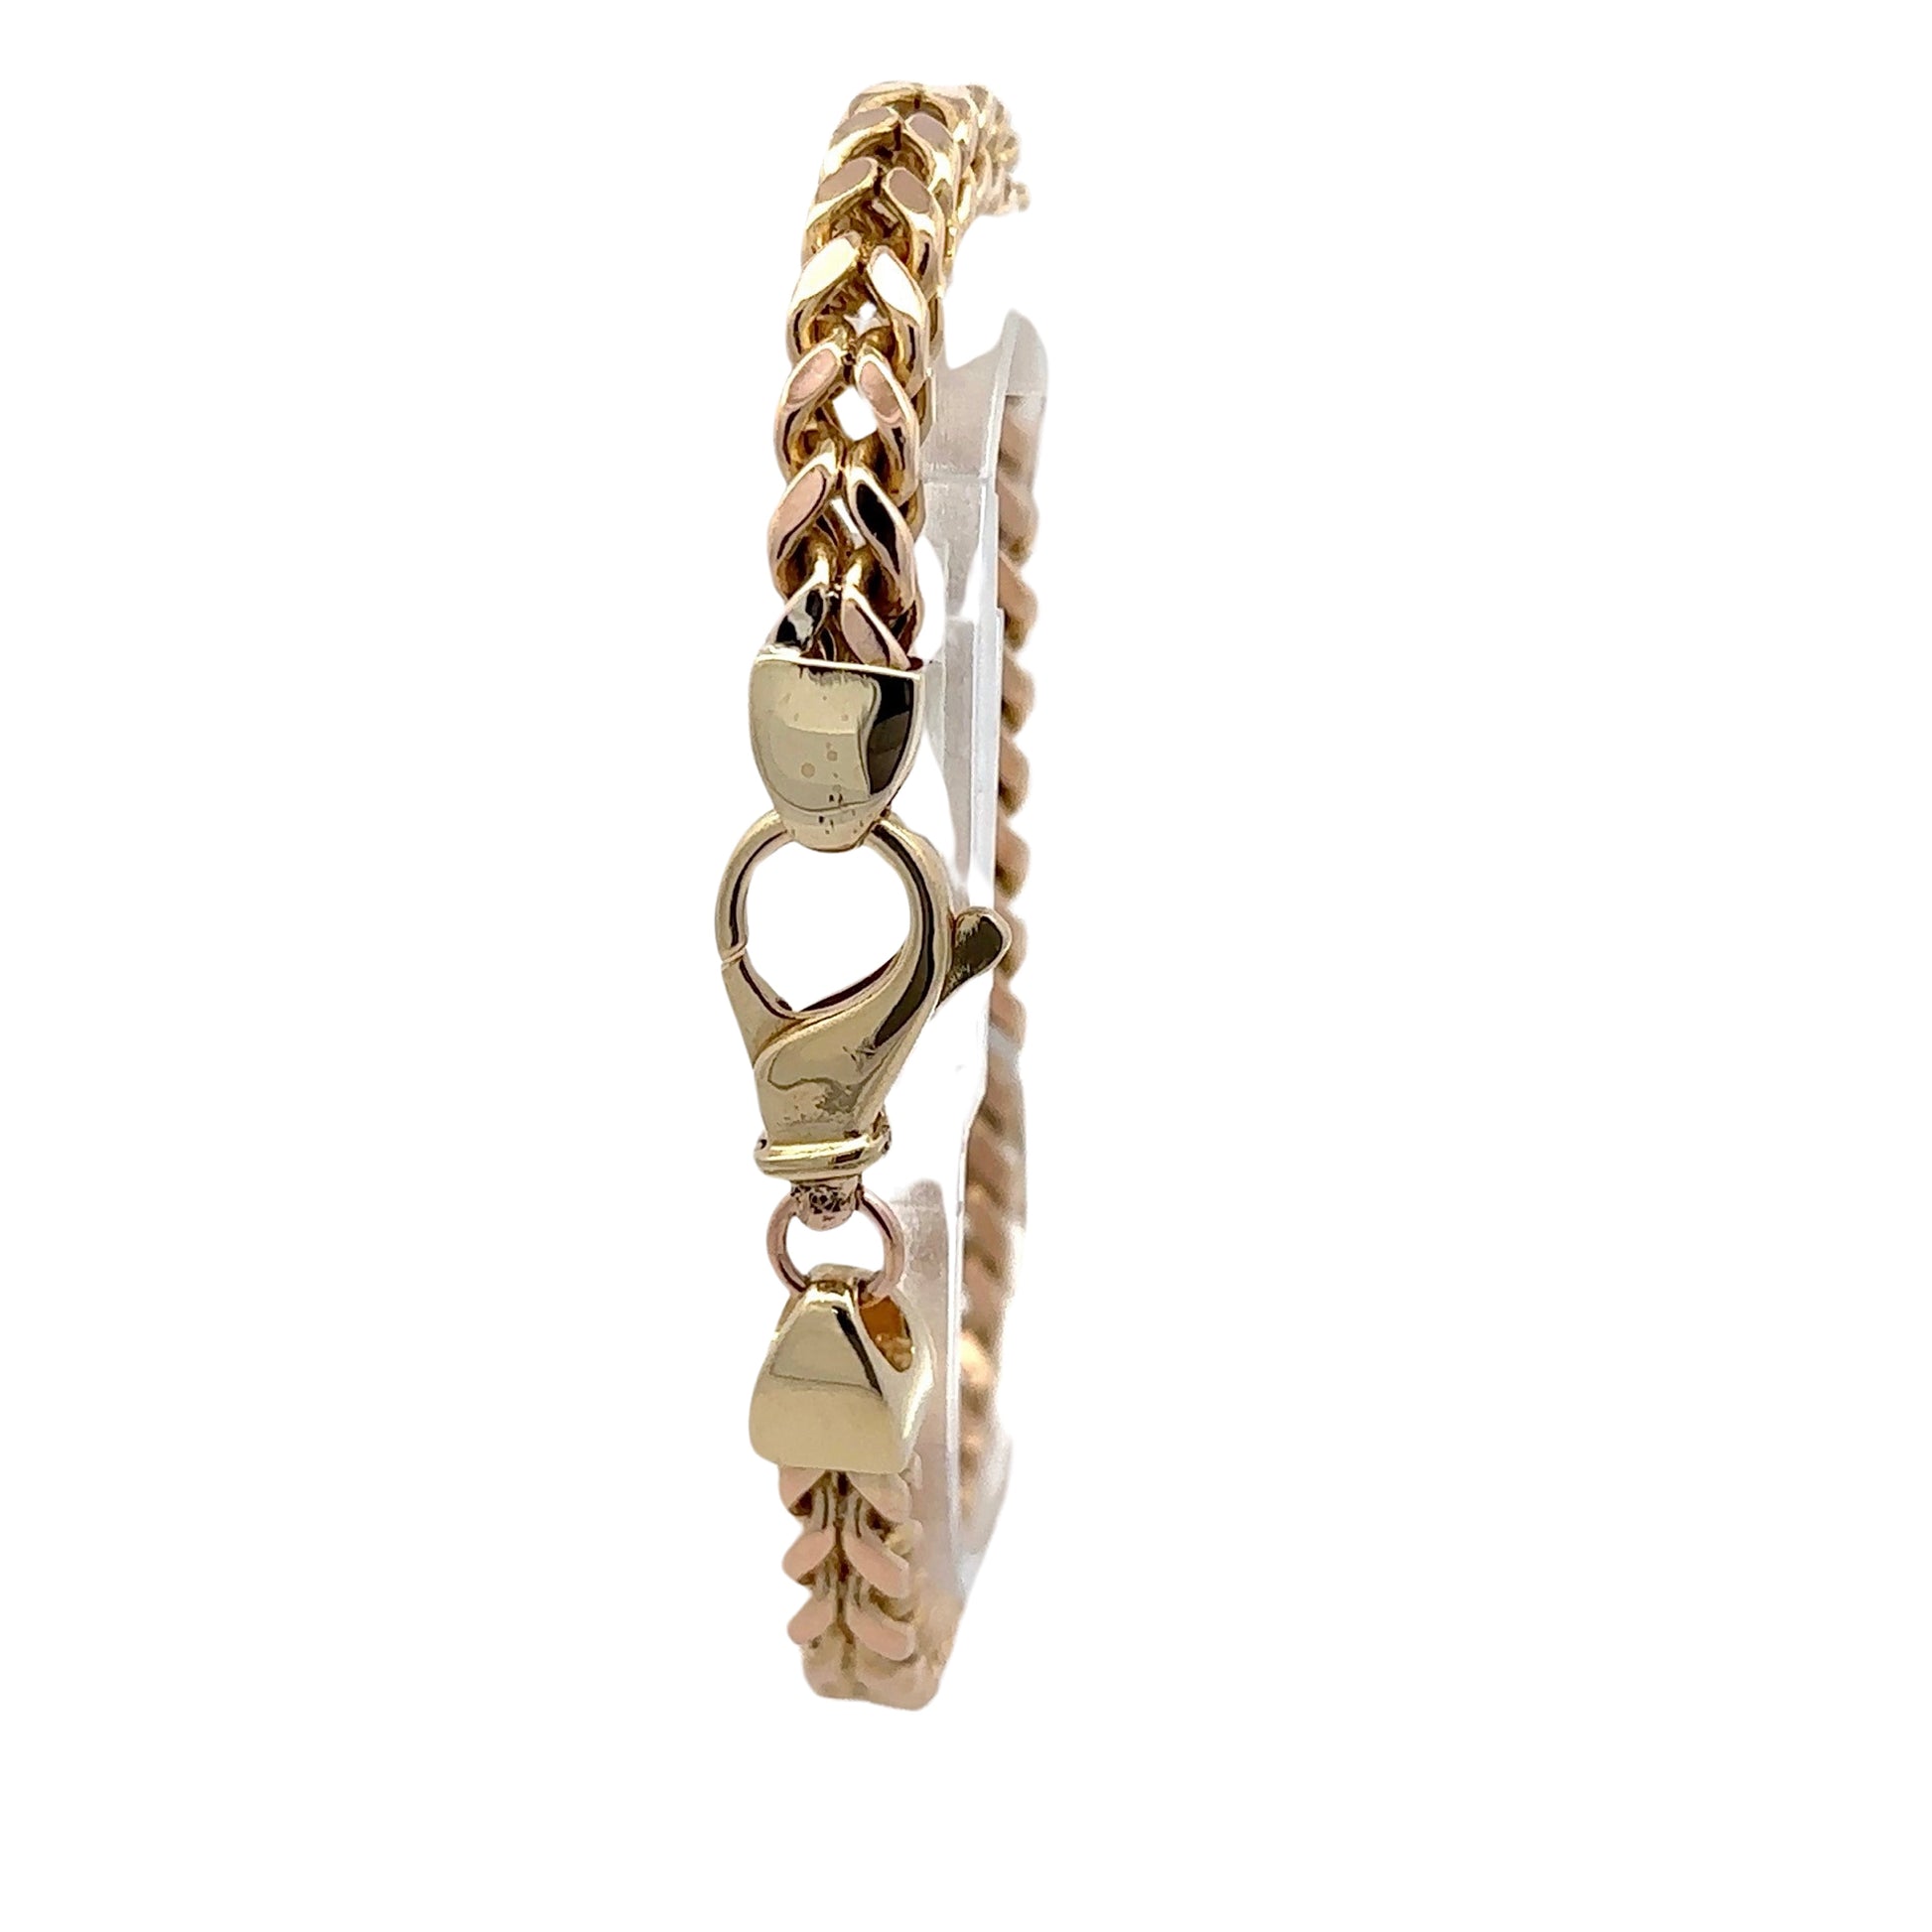 Back of yellow gold franco bracelet with lobster clasp